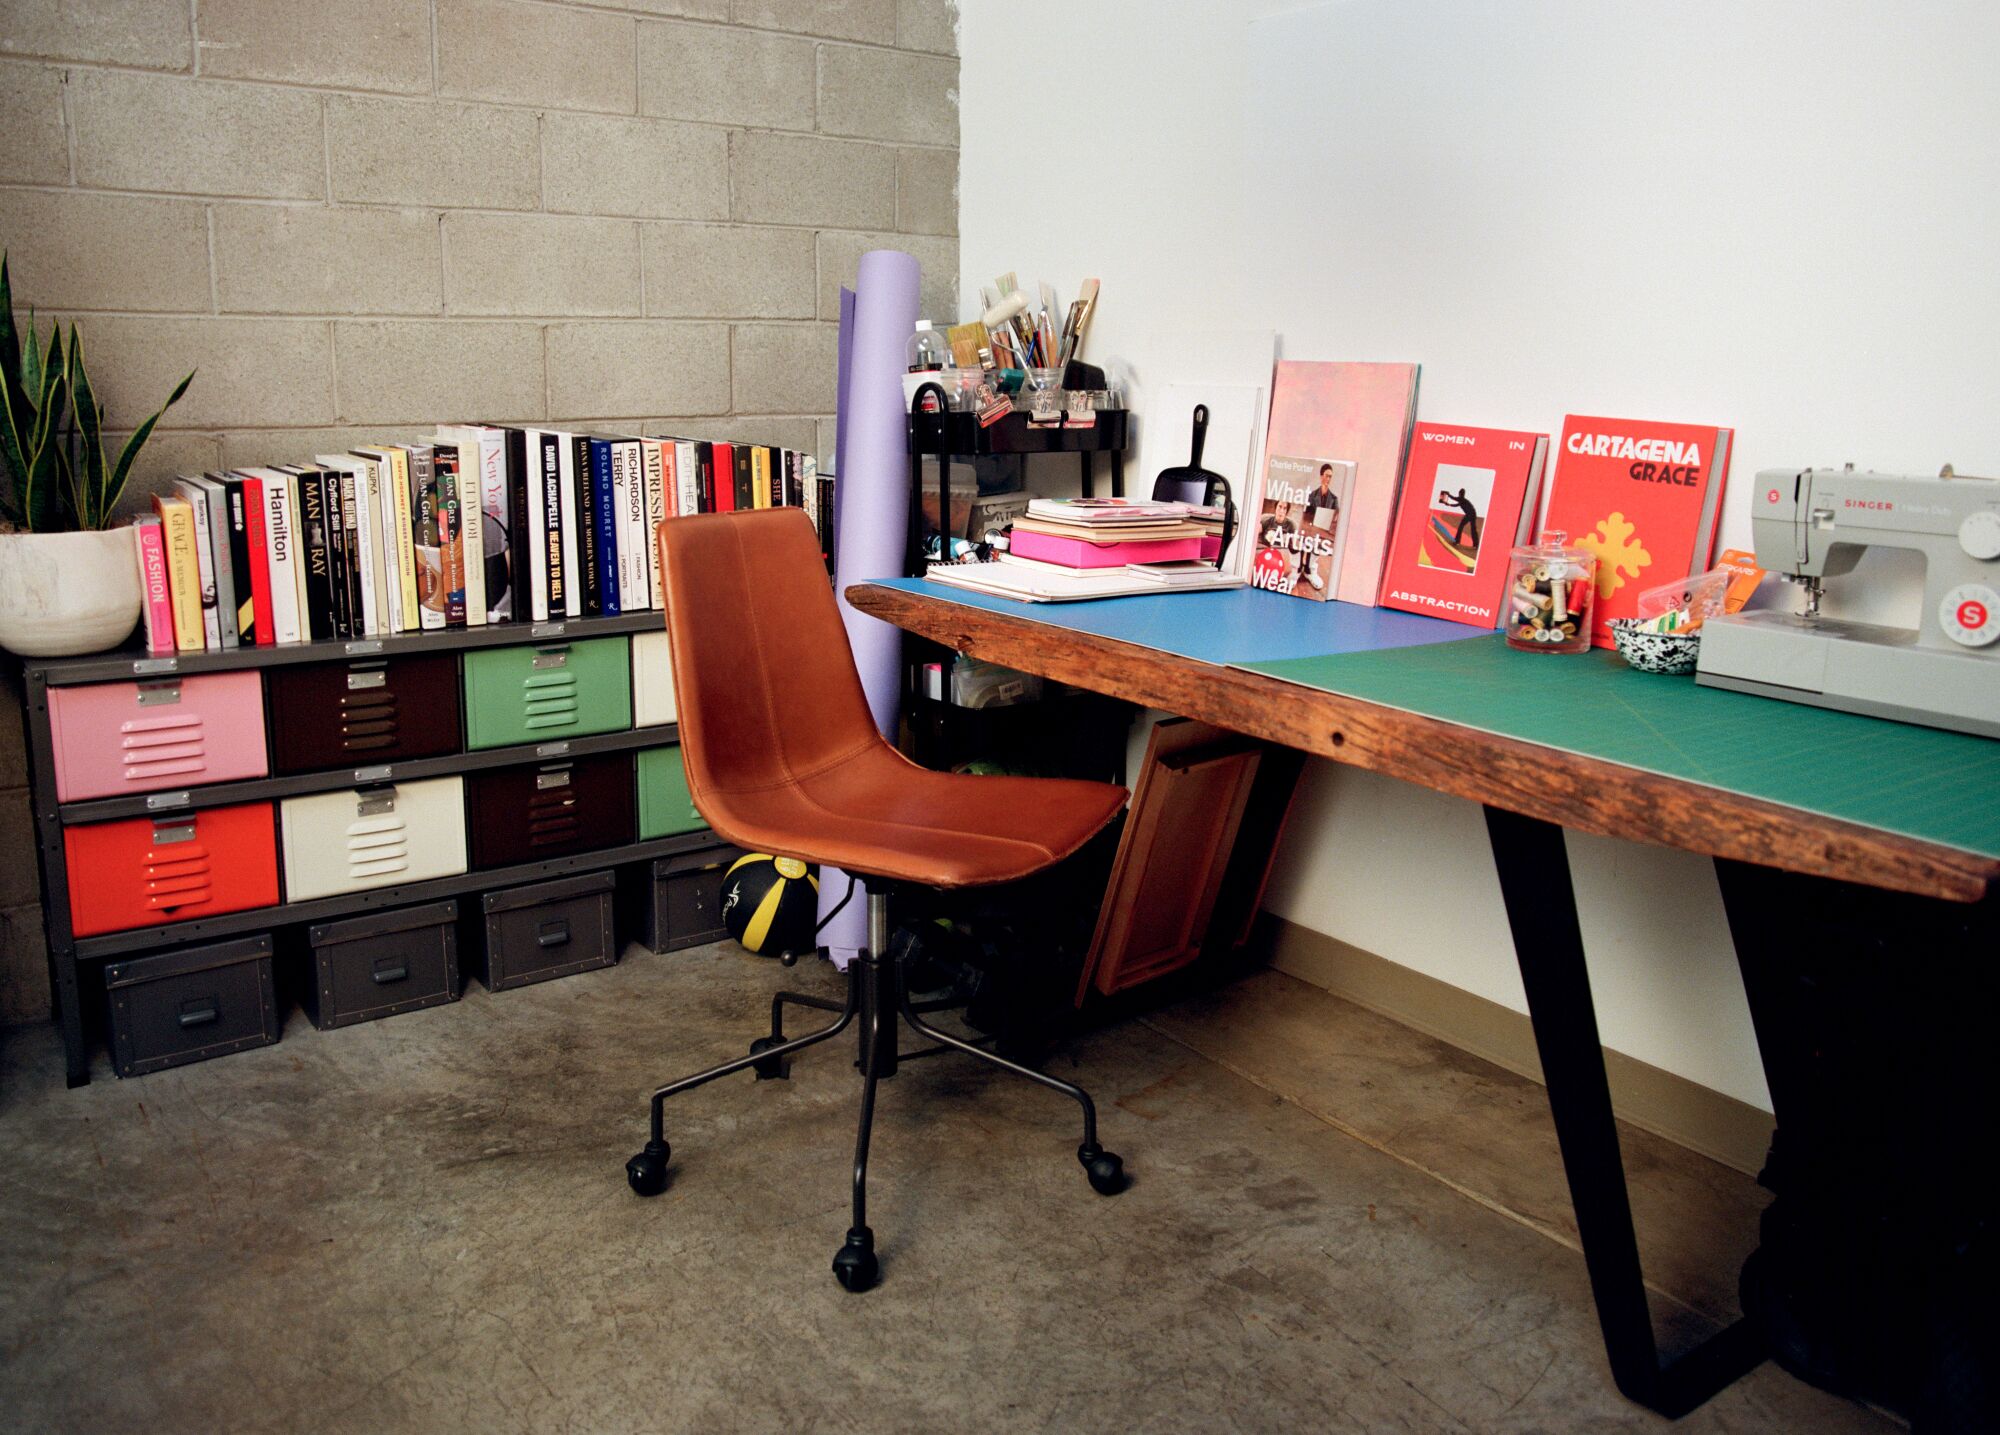 An orange chair at a wooden desk, with a shelf of books and storage boxes behind it.